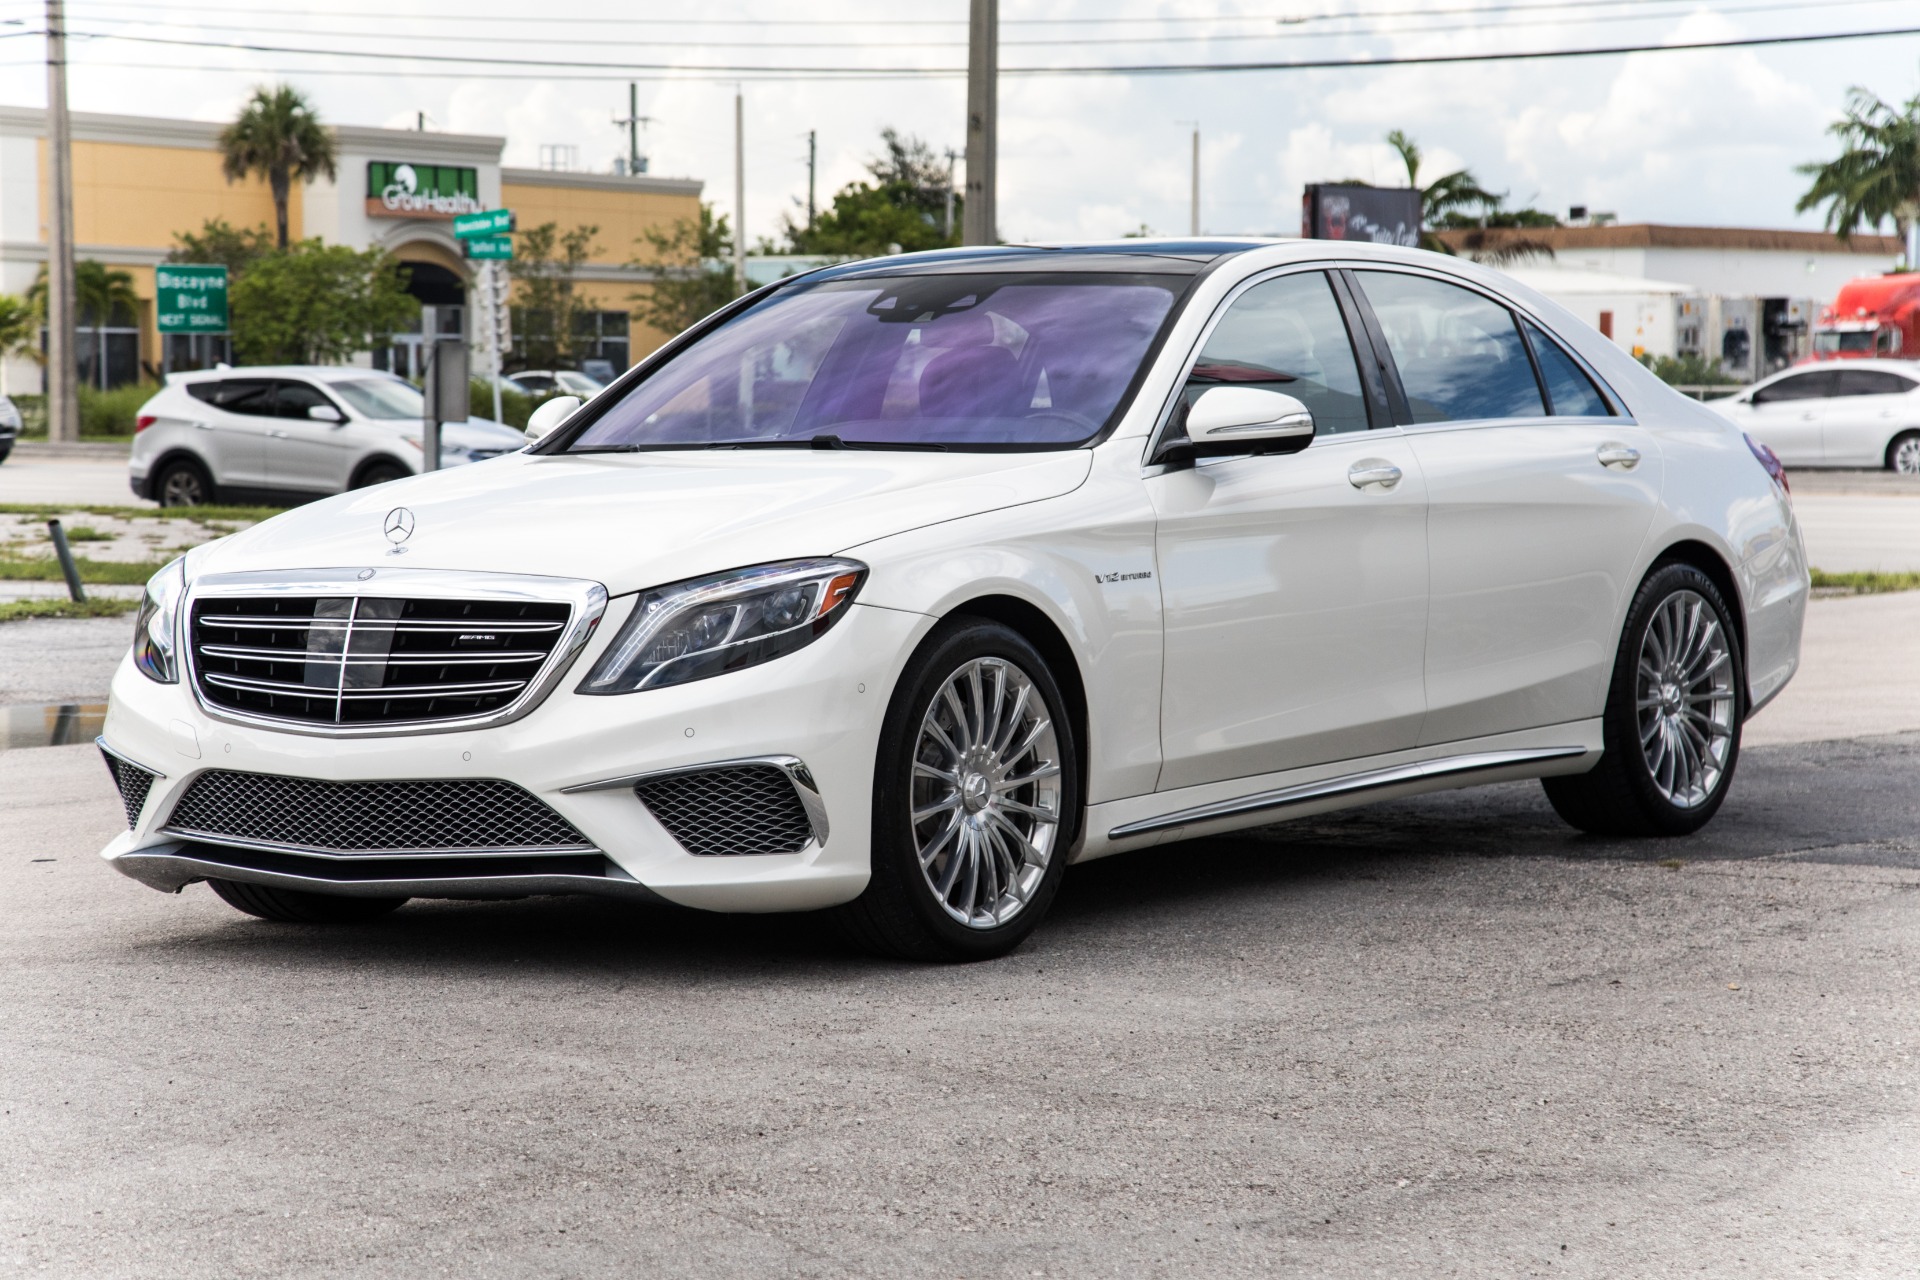 Used 2017 Mercedes Benz S Class Amg S 65 For Sale 134 900 Marino